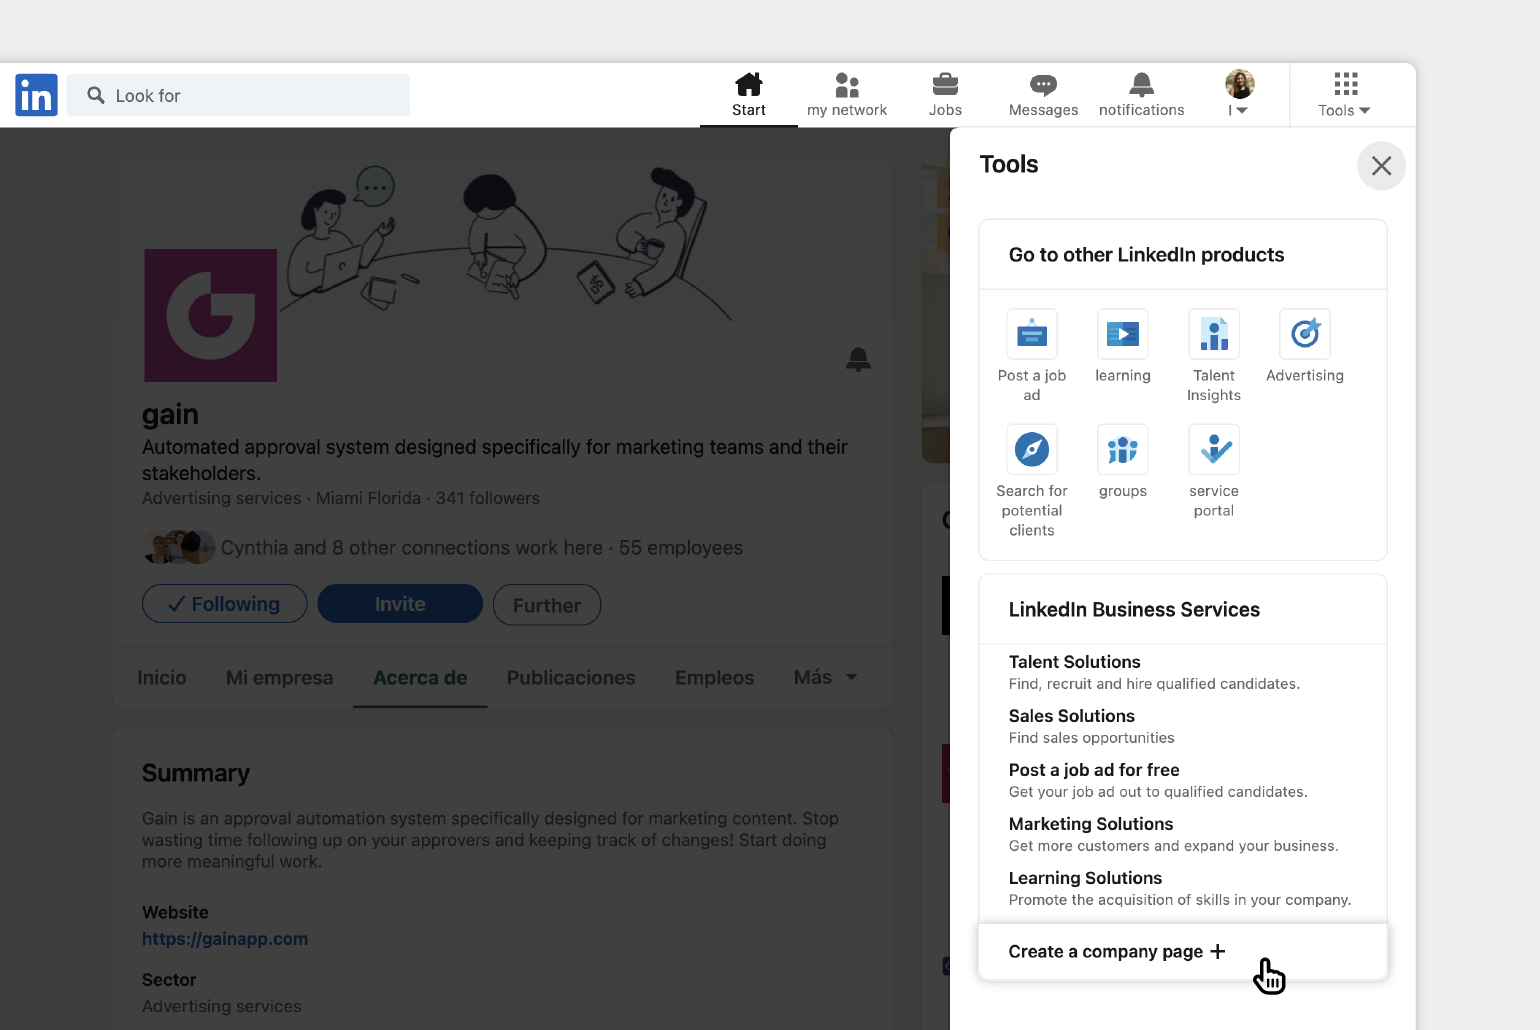 a print screen of a LinkedIn showing how to create a company page